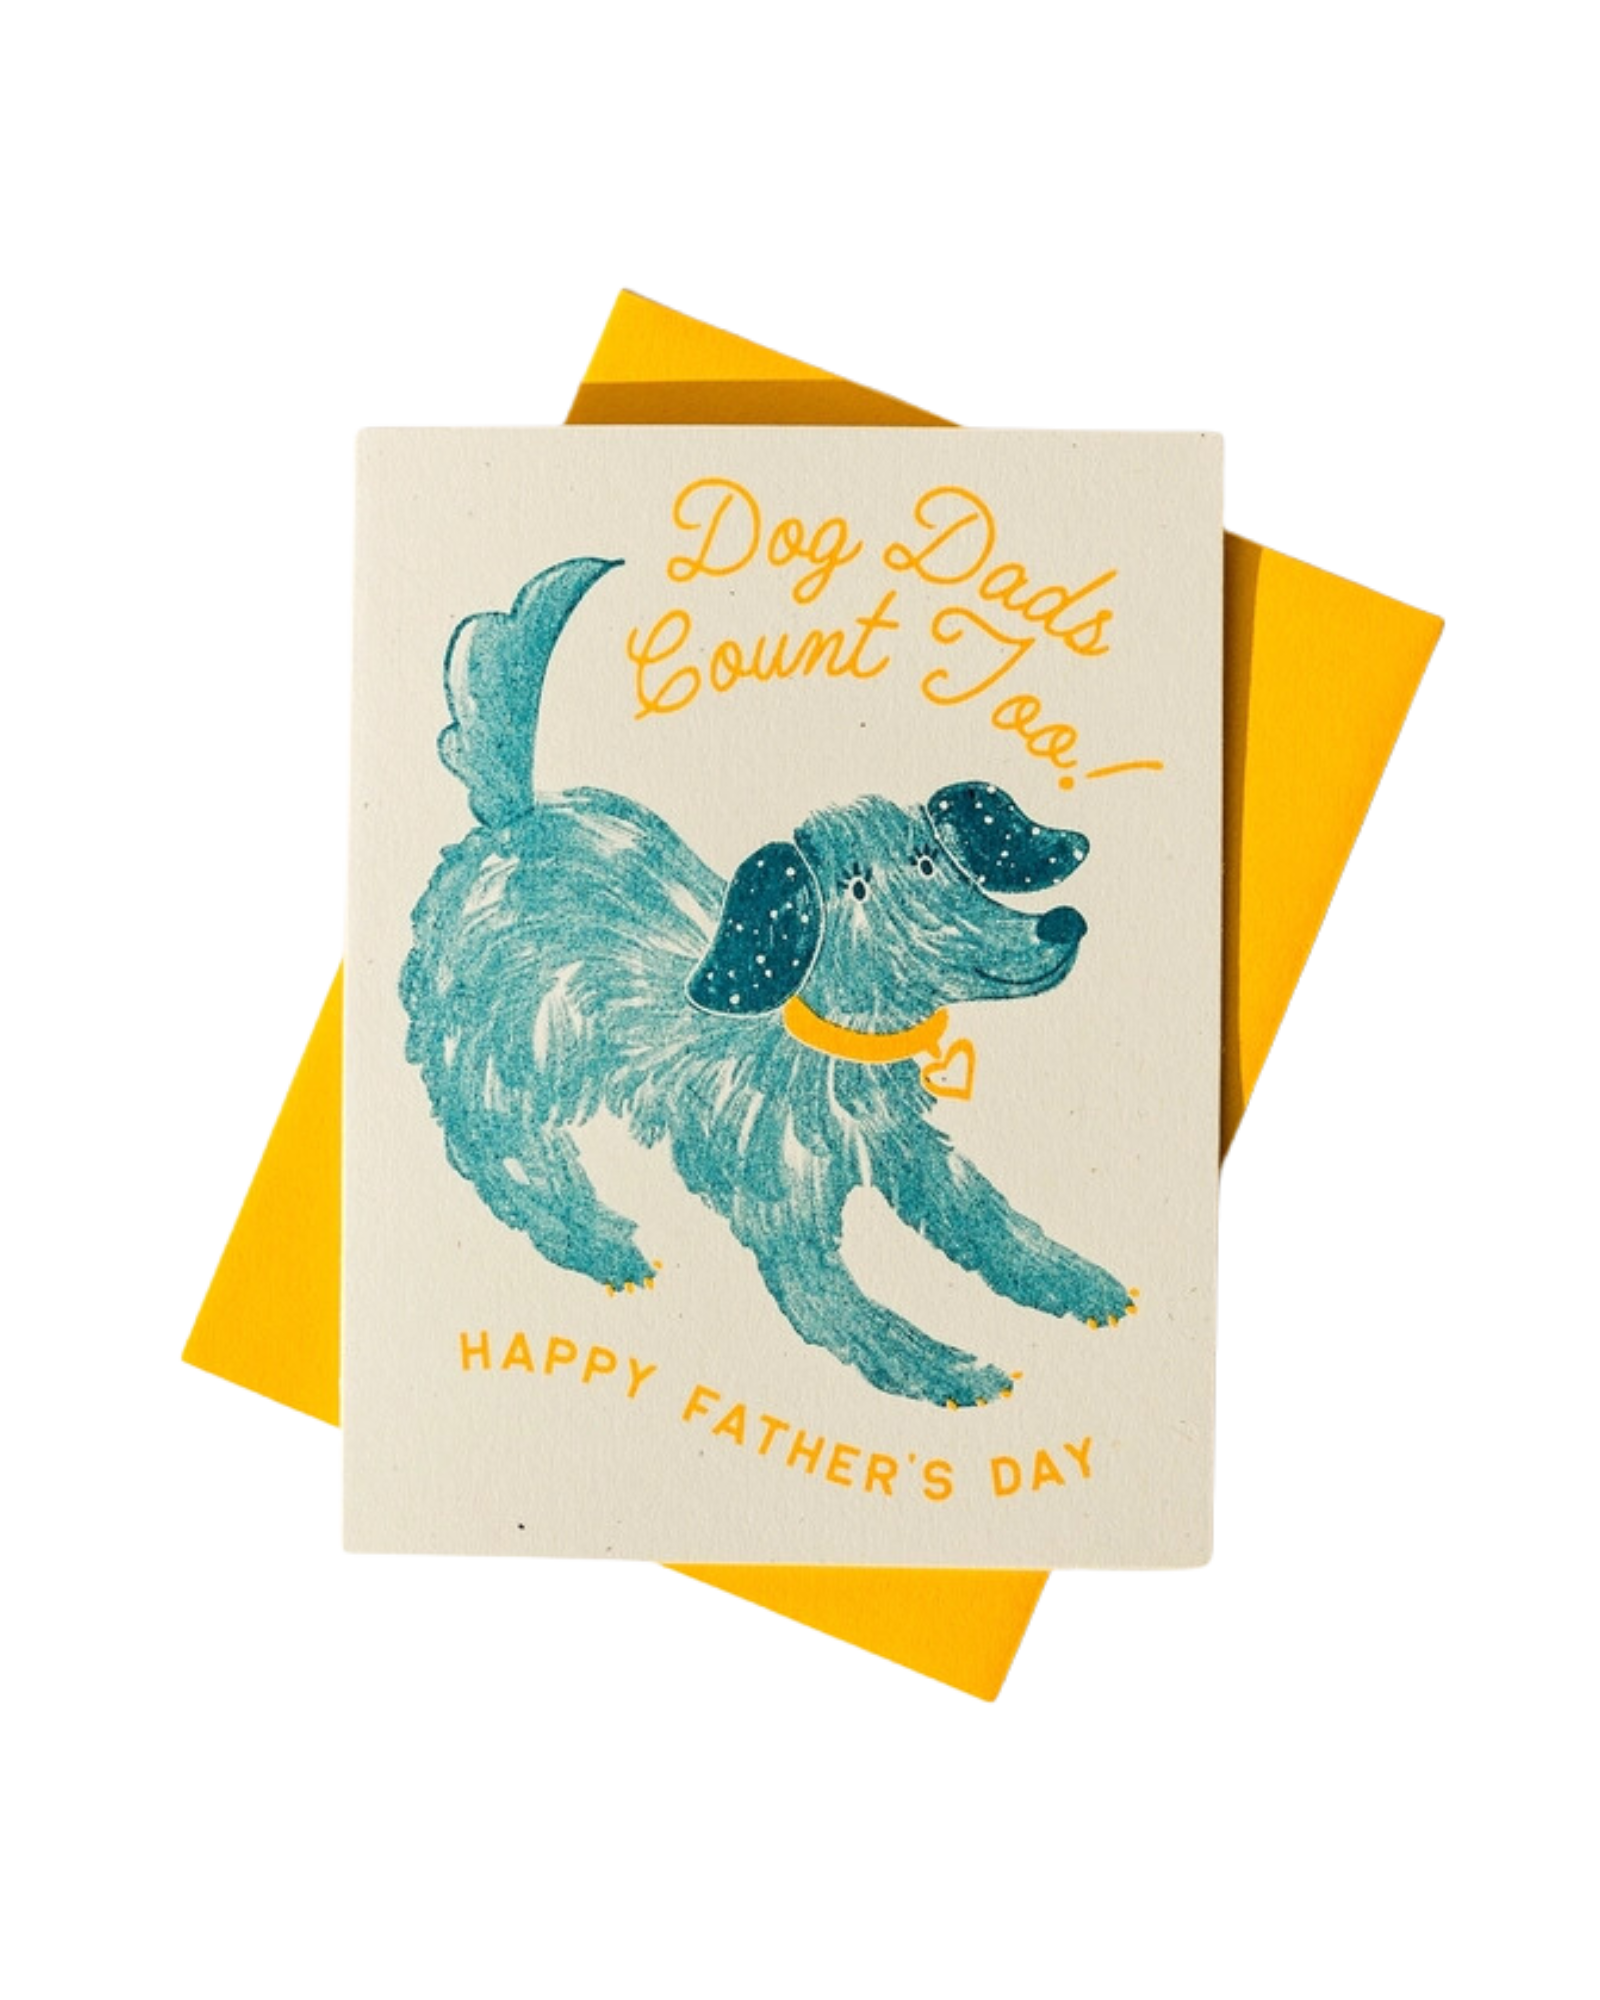 Dog Dads Count Too Father's Day Greeting Card